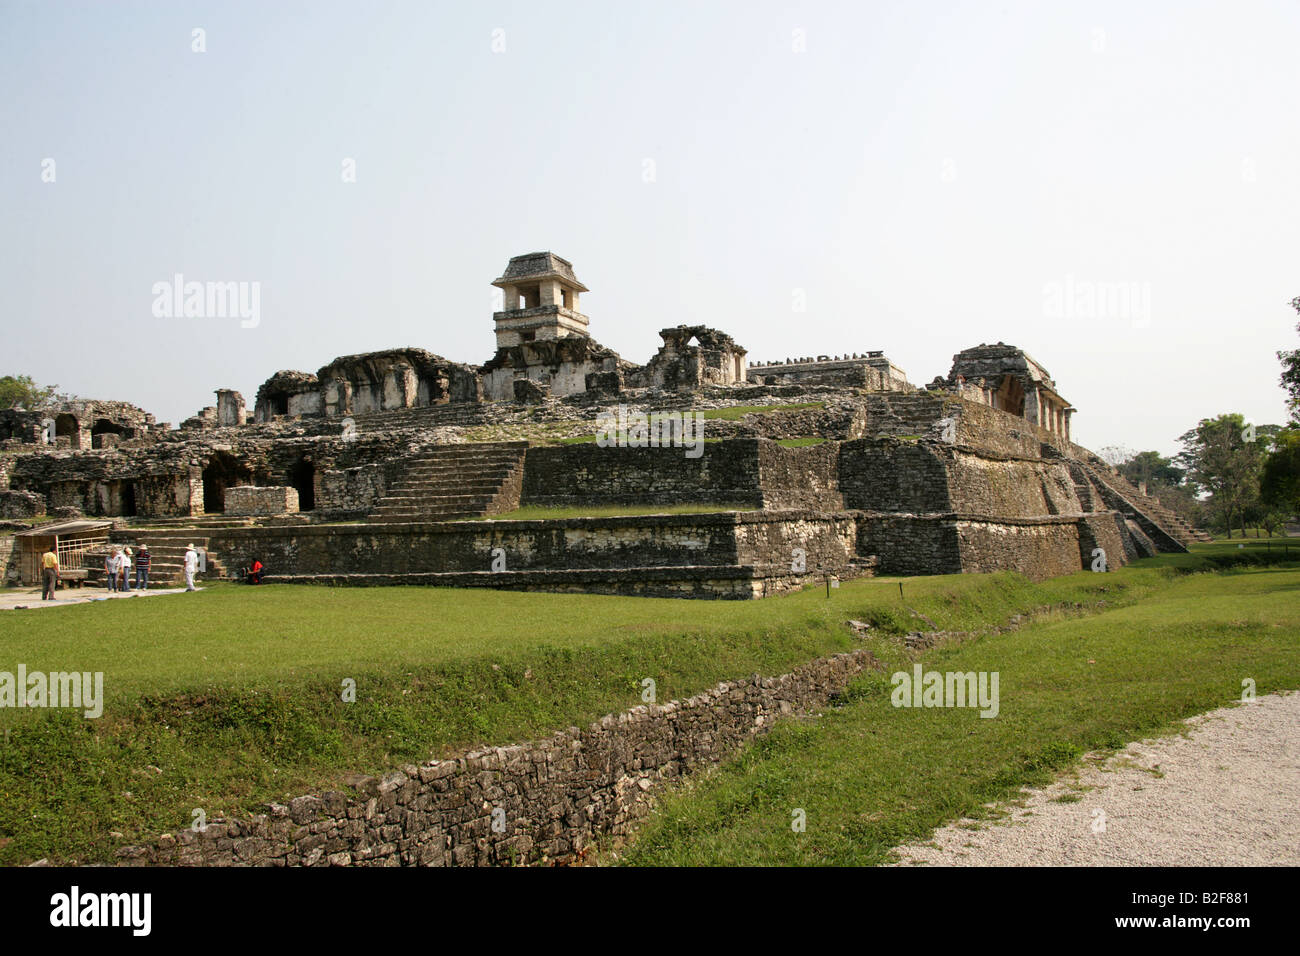 The Palace, Palenque Archeological Site, Chiapas State, Mexico Stock Photo